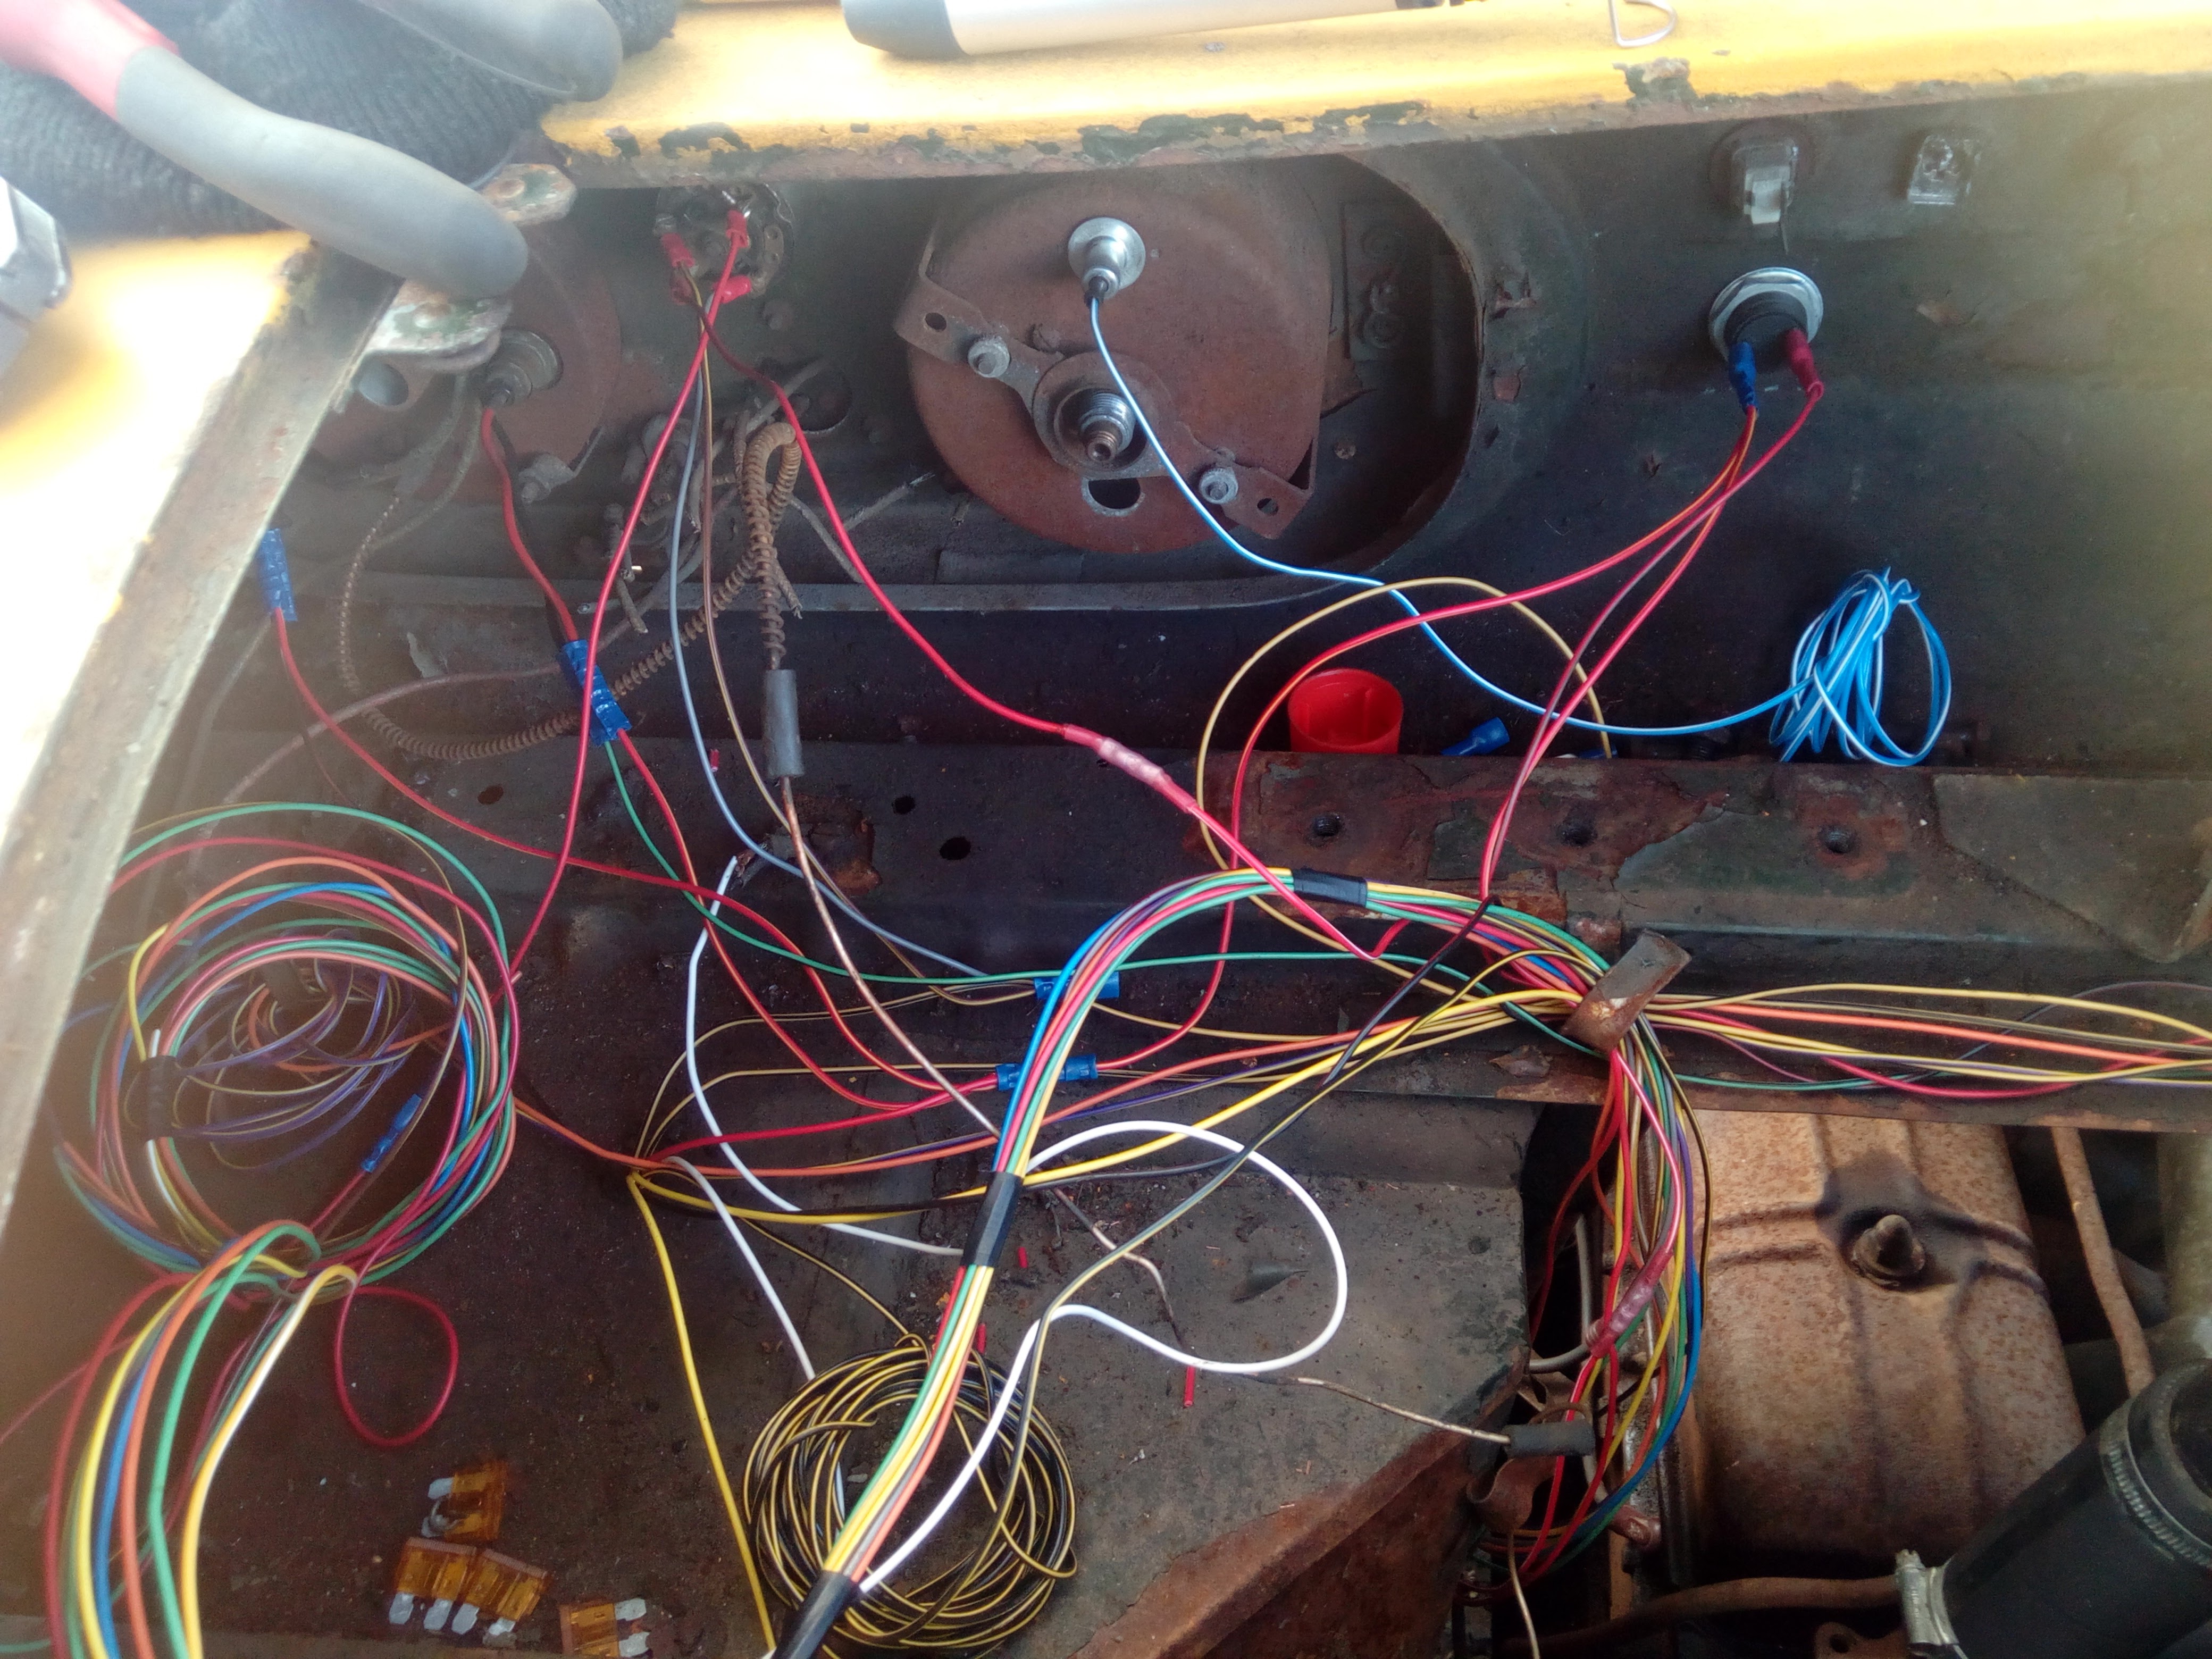 A complete rats' nest of multicoloured wiring behind the
instrument panel. There are wires going in every direction, and almost
no organisation to it.